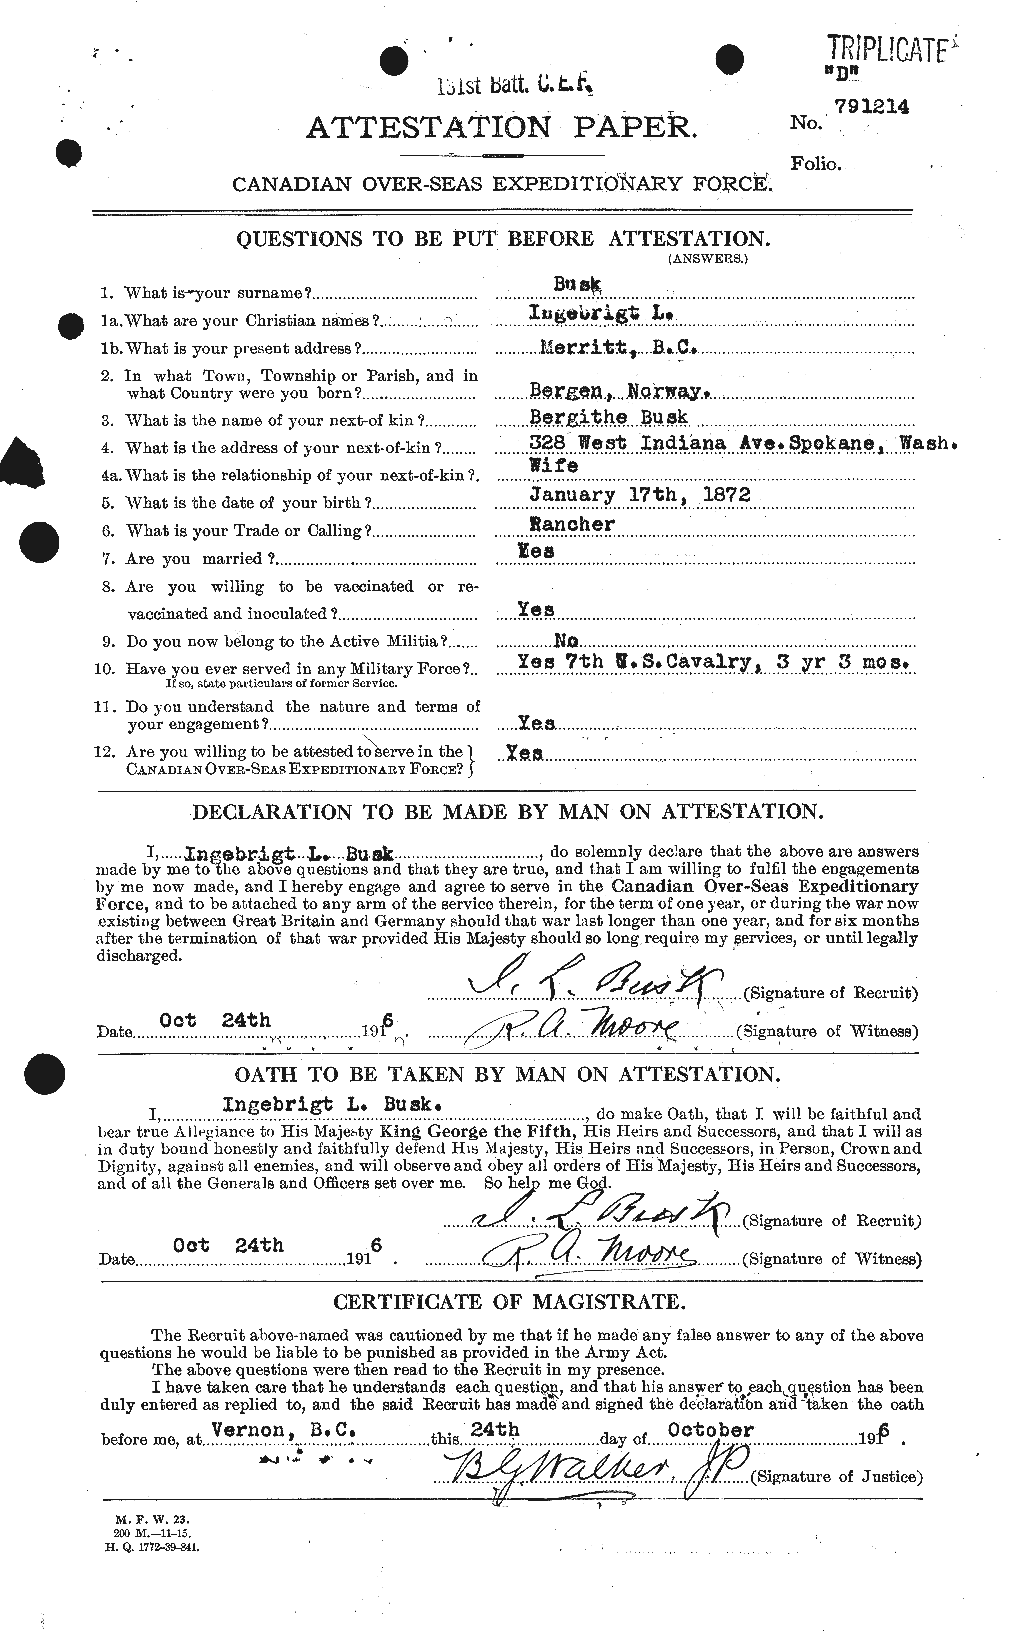 Personnel Records of the First World War - CEF 274548a